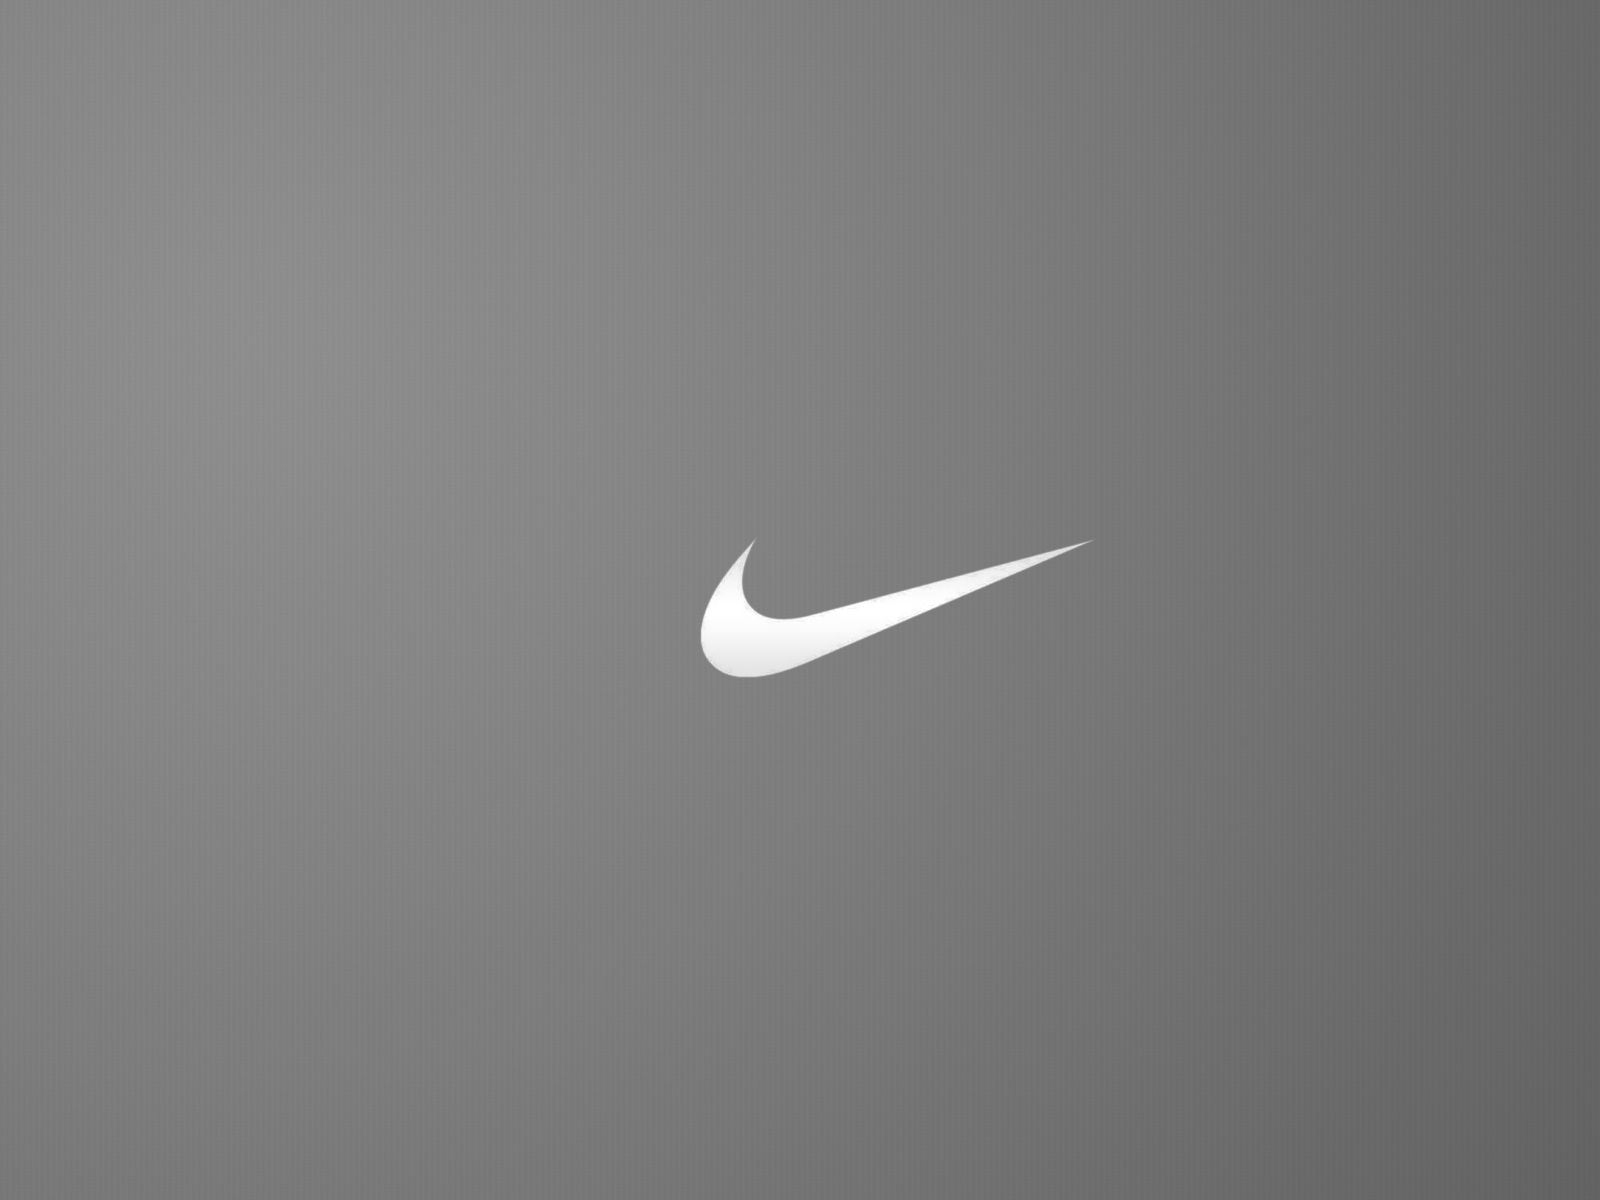 All Black with Nike Check Wallpapers on 